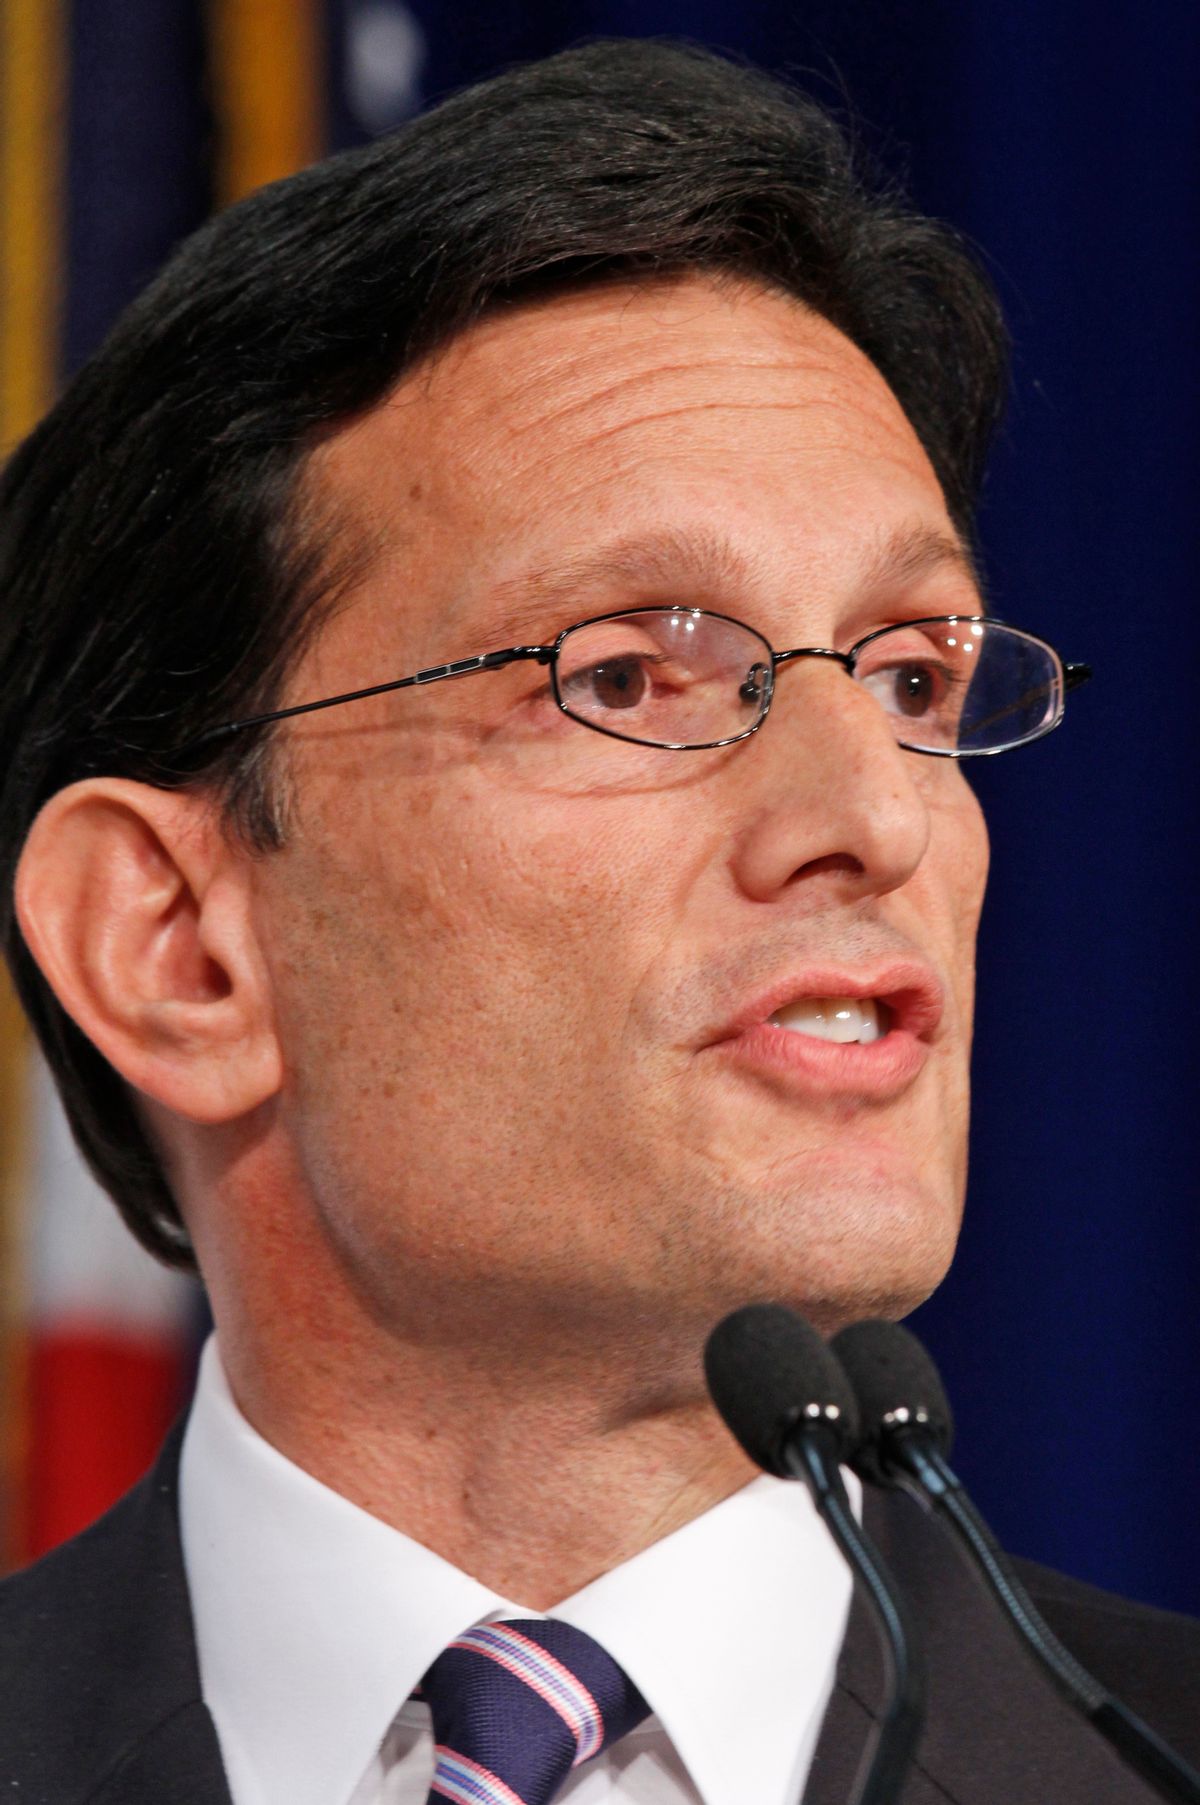 FILE - This Monday Oct. 1, 2012 file photo shows House majority leader Eric Cantor, R-Va., as he speaks during a Chamber of Commerce debate in Richmond, Va., Cantor is being challenged by Dav Brat in Tuesday's GOP 7th district congressional primary. (AP Photo/Steve Helber, File) (AP)